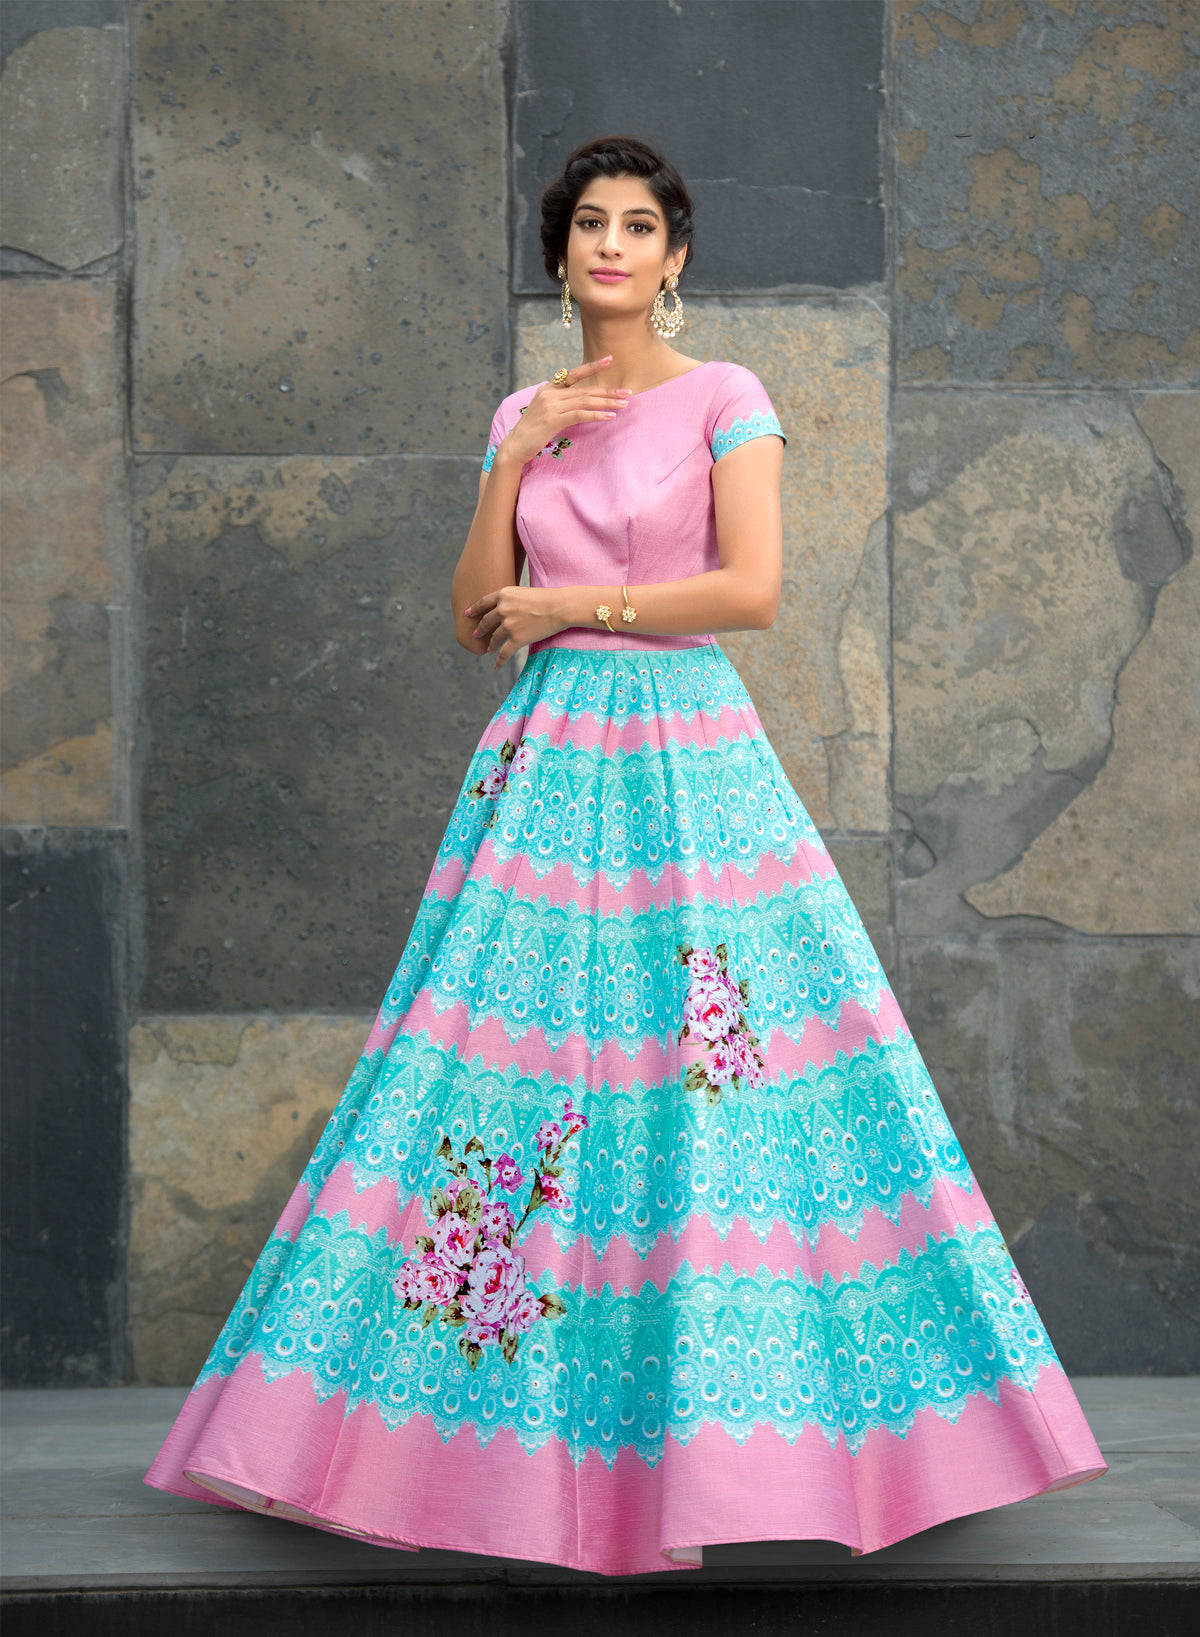 Effortless Glamour: A Tussar Silk Gown for the Modern Fashionista